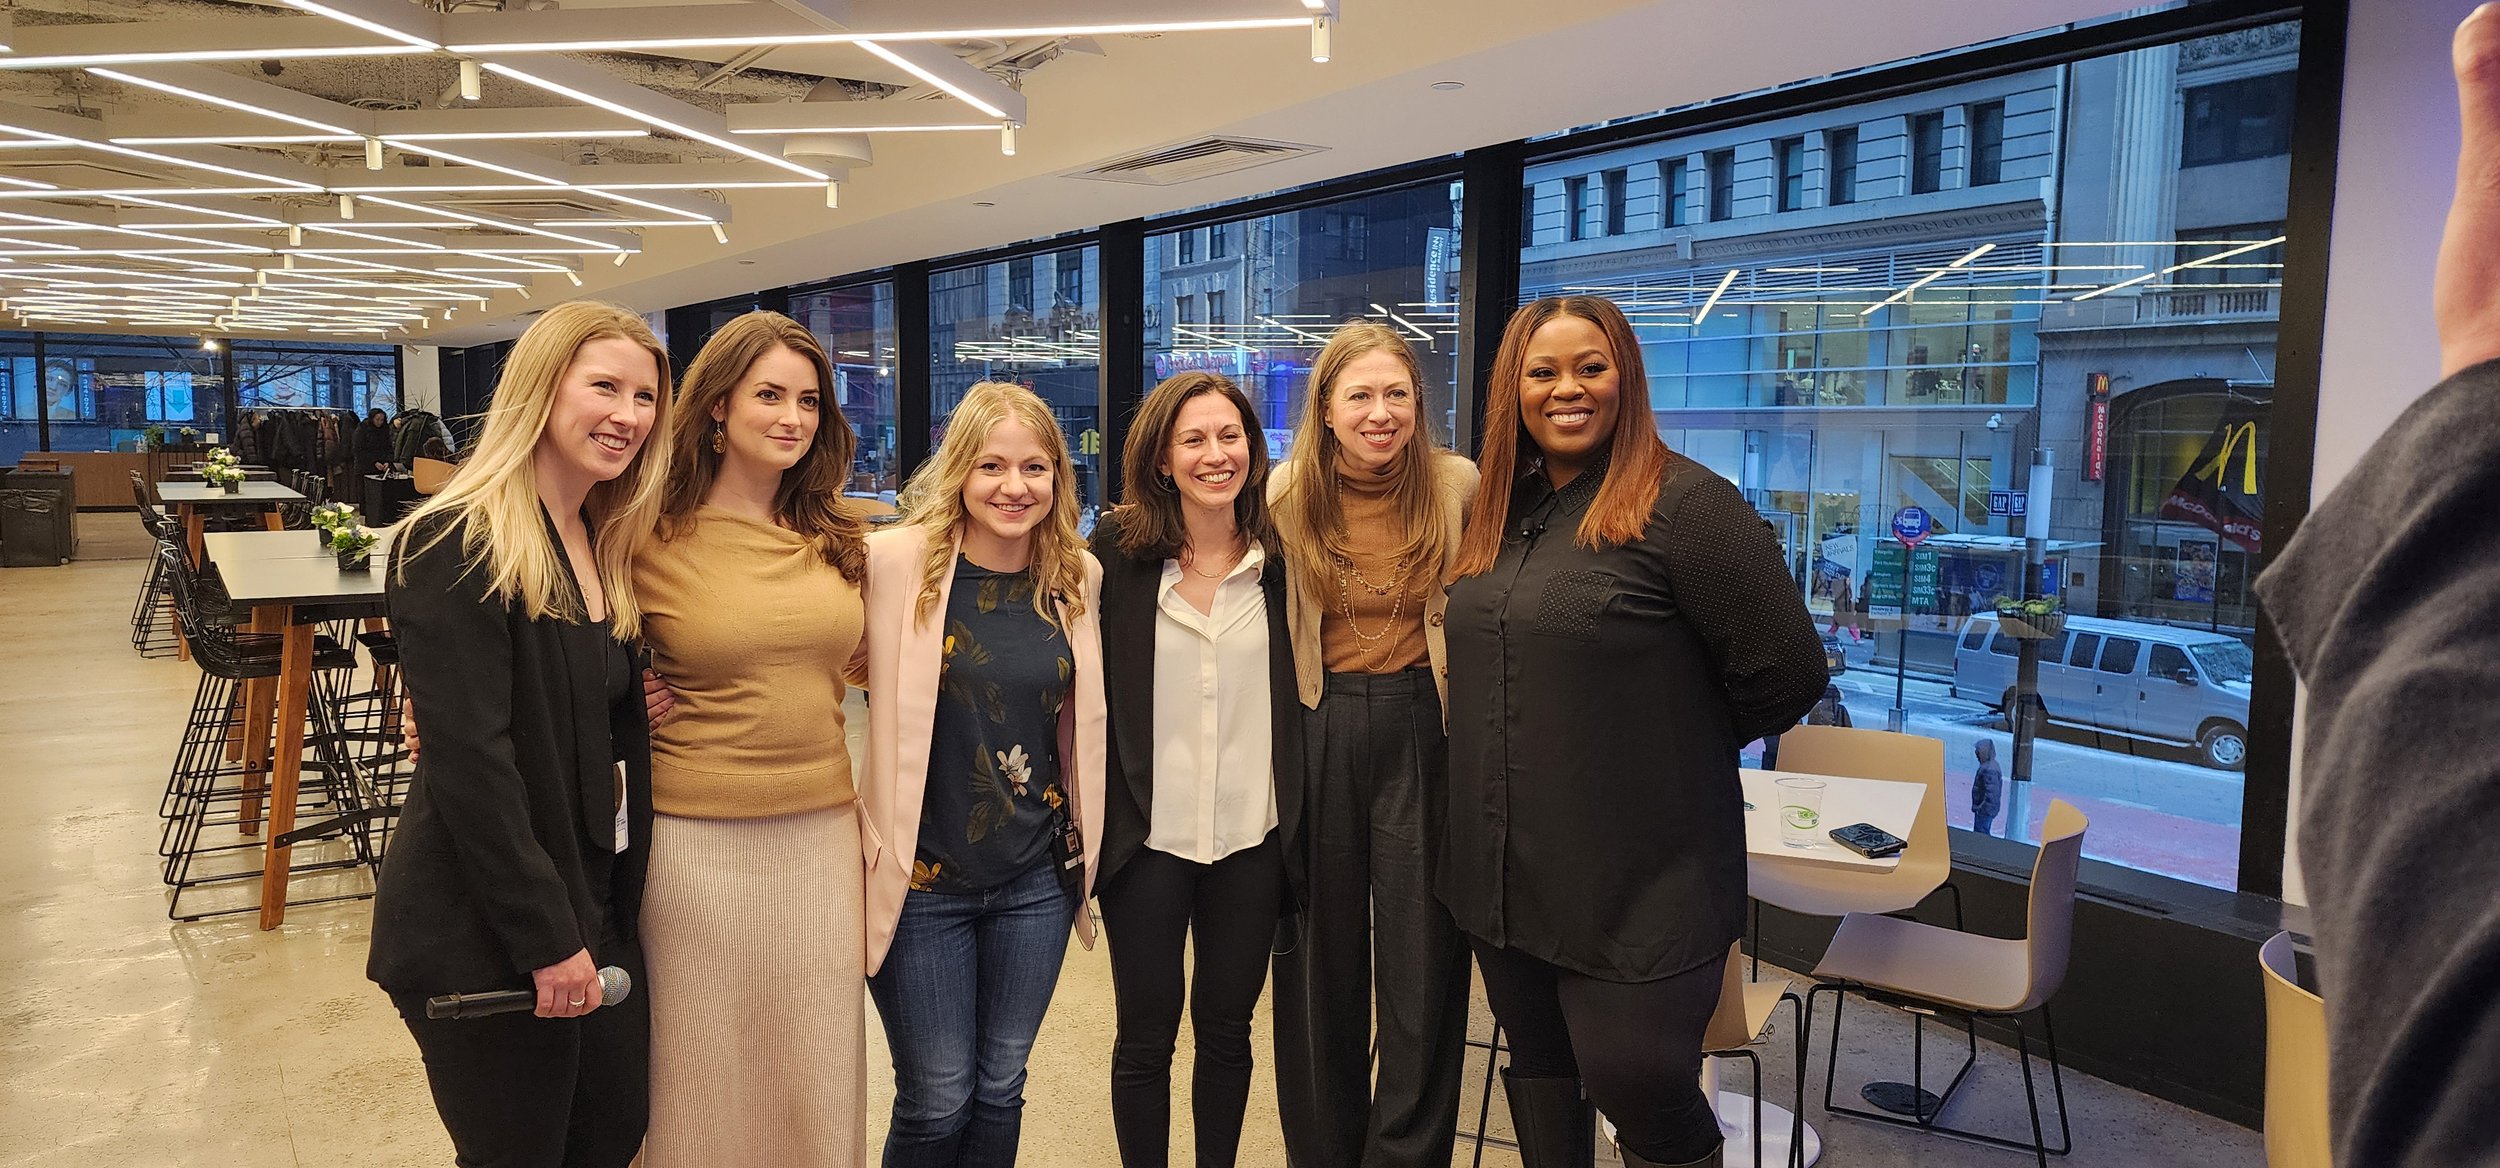  Akili Event panelists: Full Focus: An In-Depth Look at what ADHD means for women. A Panel discussion moderated by Dr Chelsea Clinton. Panelists: Michelle Carter; Jacqueline Trumbull; Marie 'Mxiety' Shanley; Dr. Julia Schechter. 